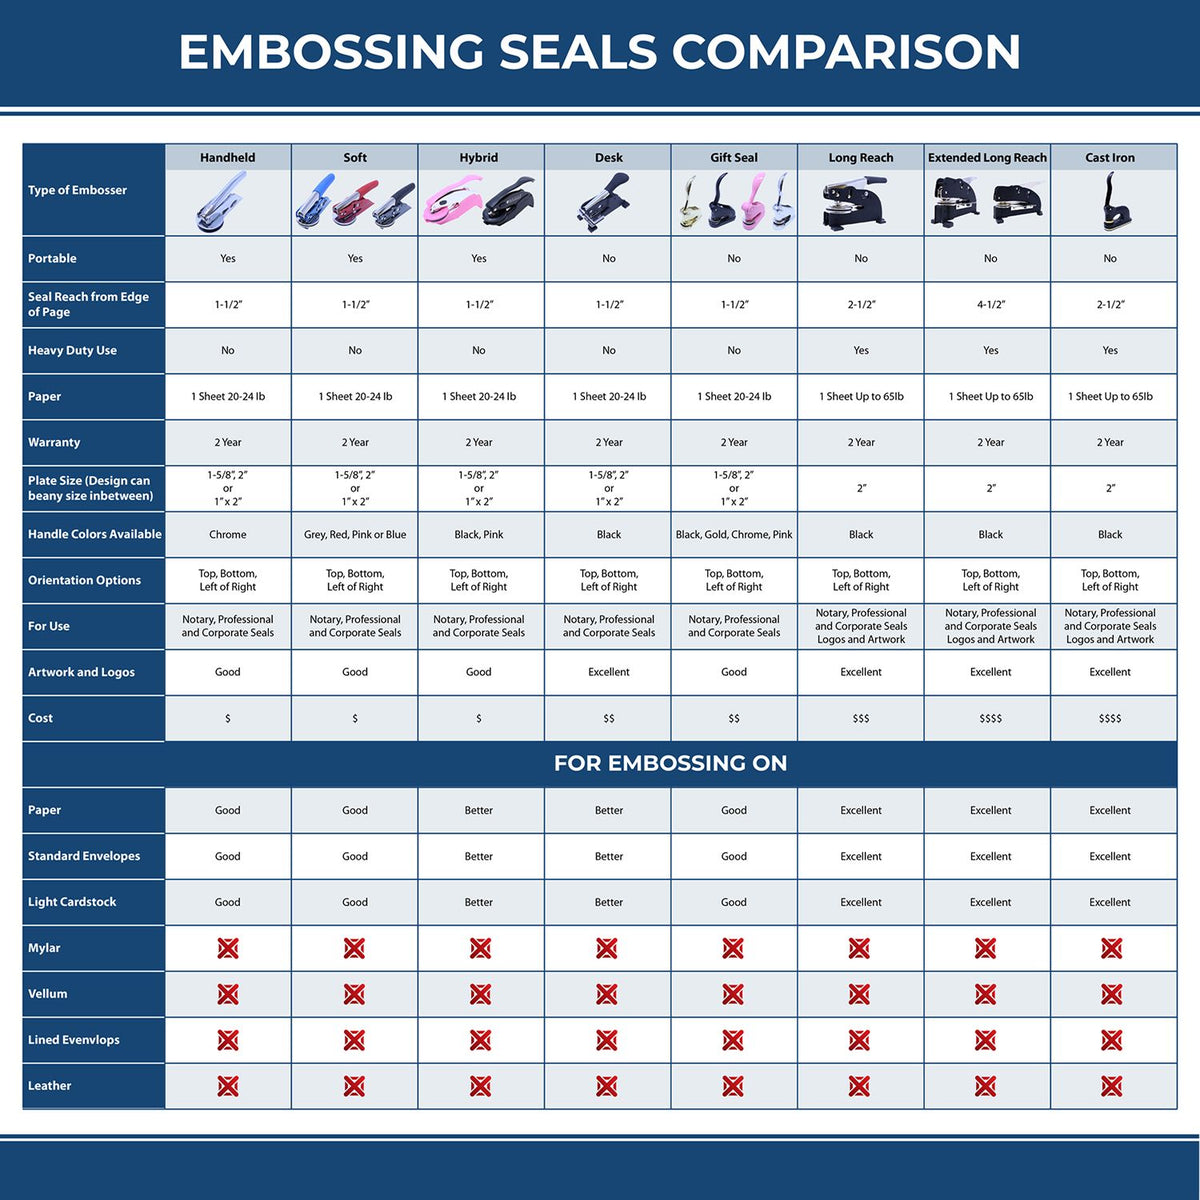 A comparison chart for the different types of mount models available for the Long Reach Ohio PE Seal.